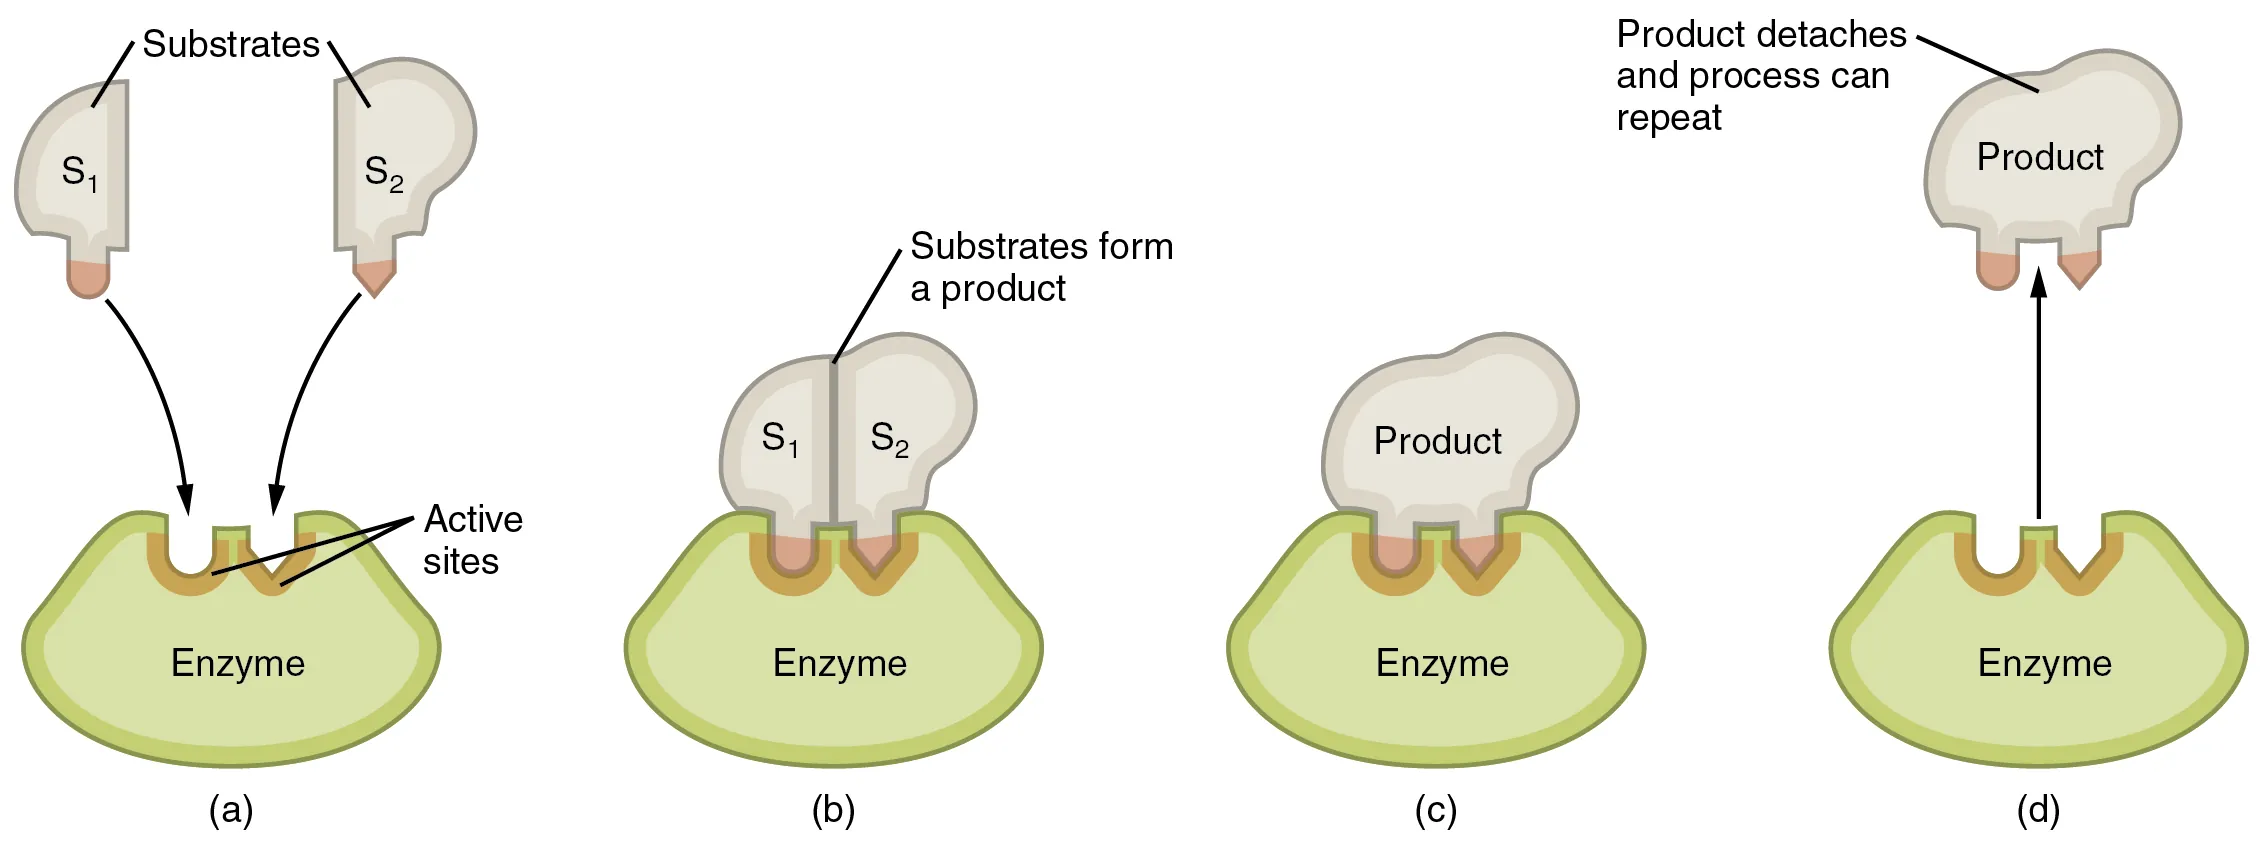 This image shows the steps in which an enzyme can act. The substrate is shown binding to the enzyme, forming a product, and the detachment of the product.